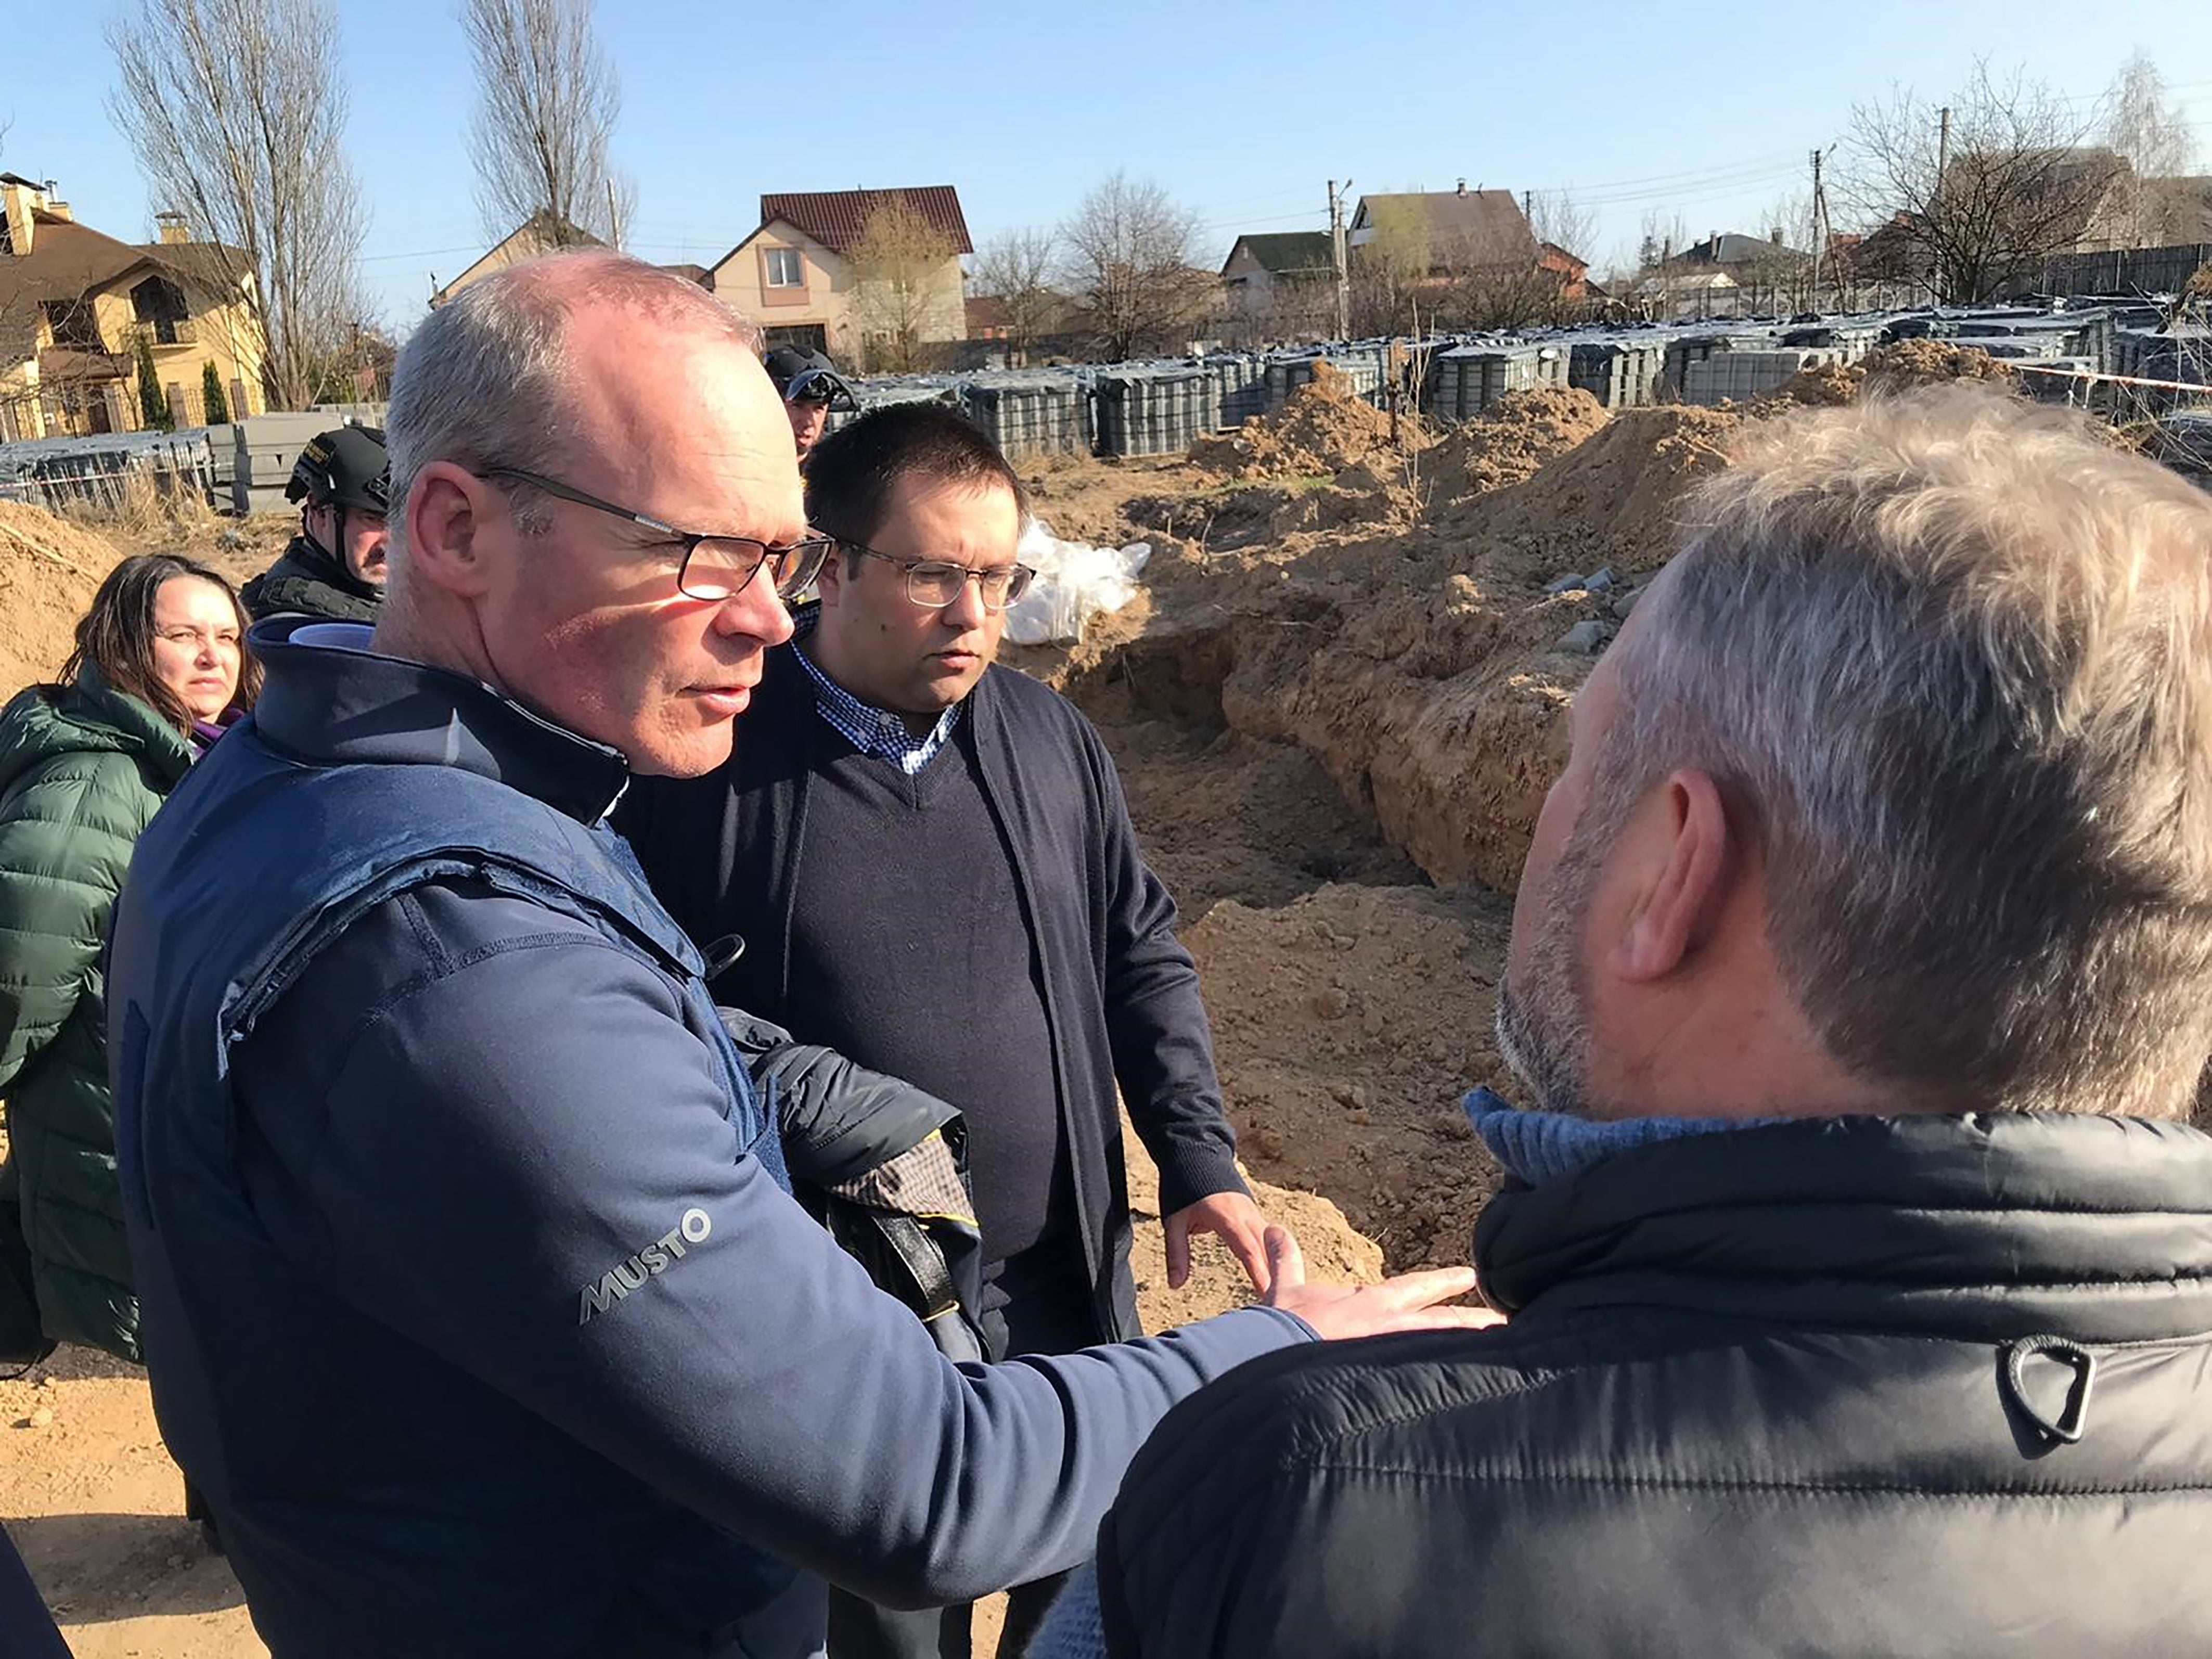 Ireland’s Minister for Foreign Affairs Simon Coveney being shown the site of mass graves in Bucha earlier this year (Department of Foreign Affairs/PA)